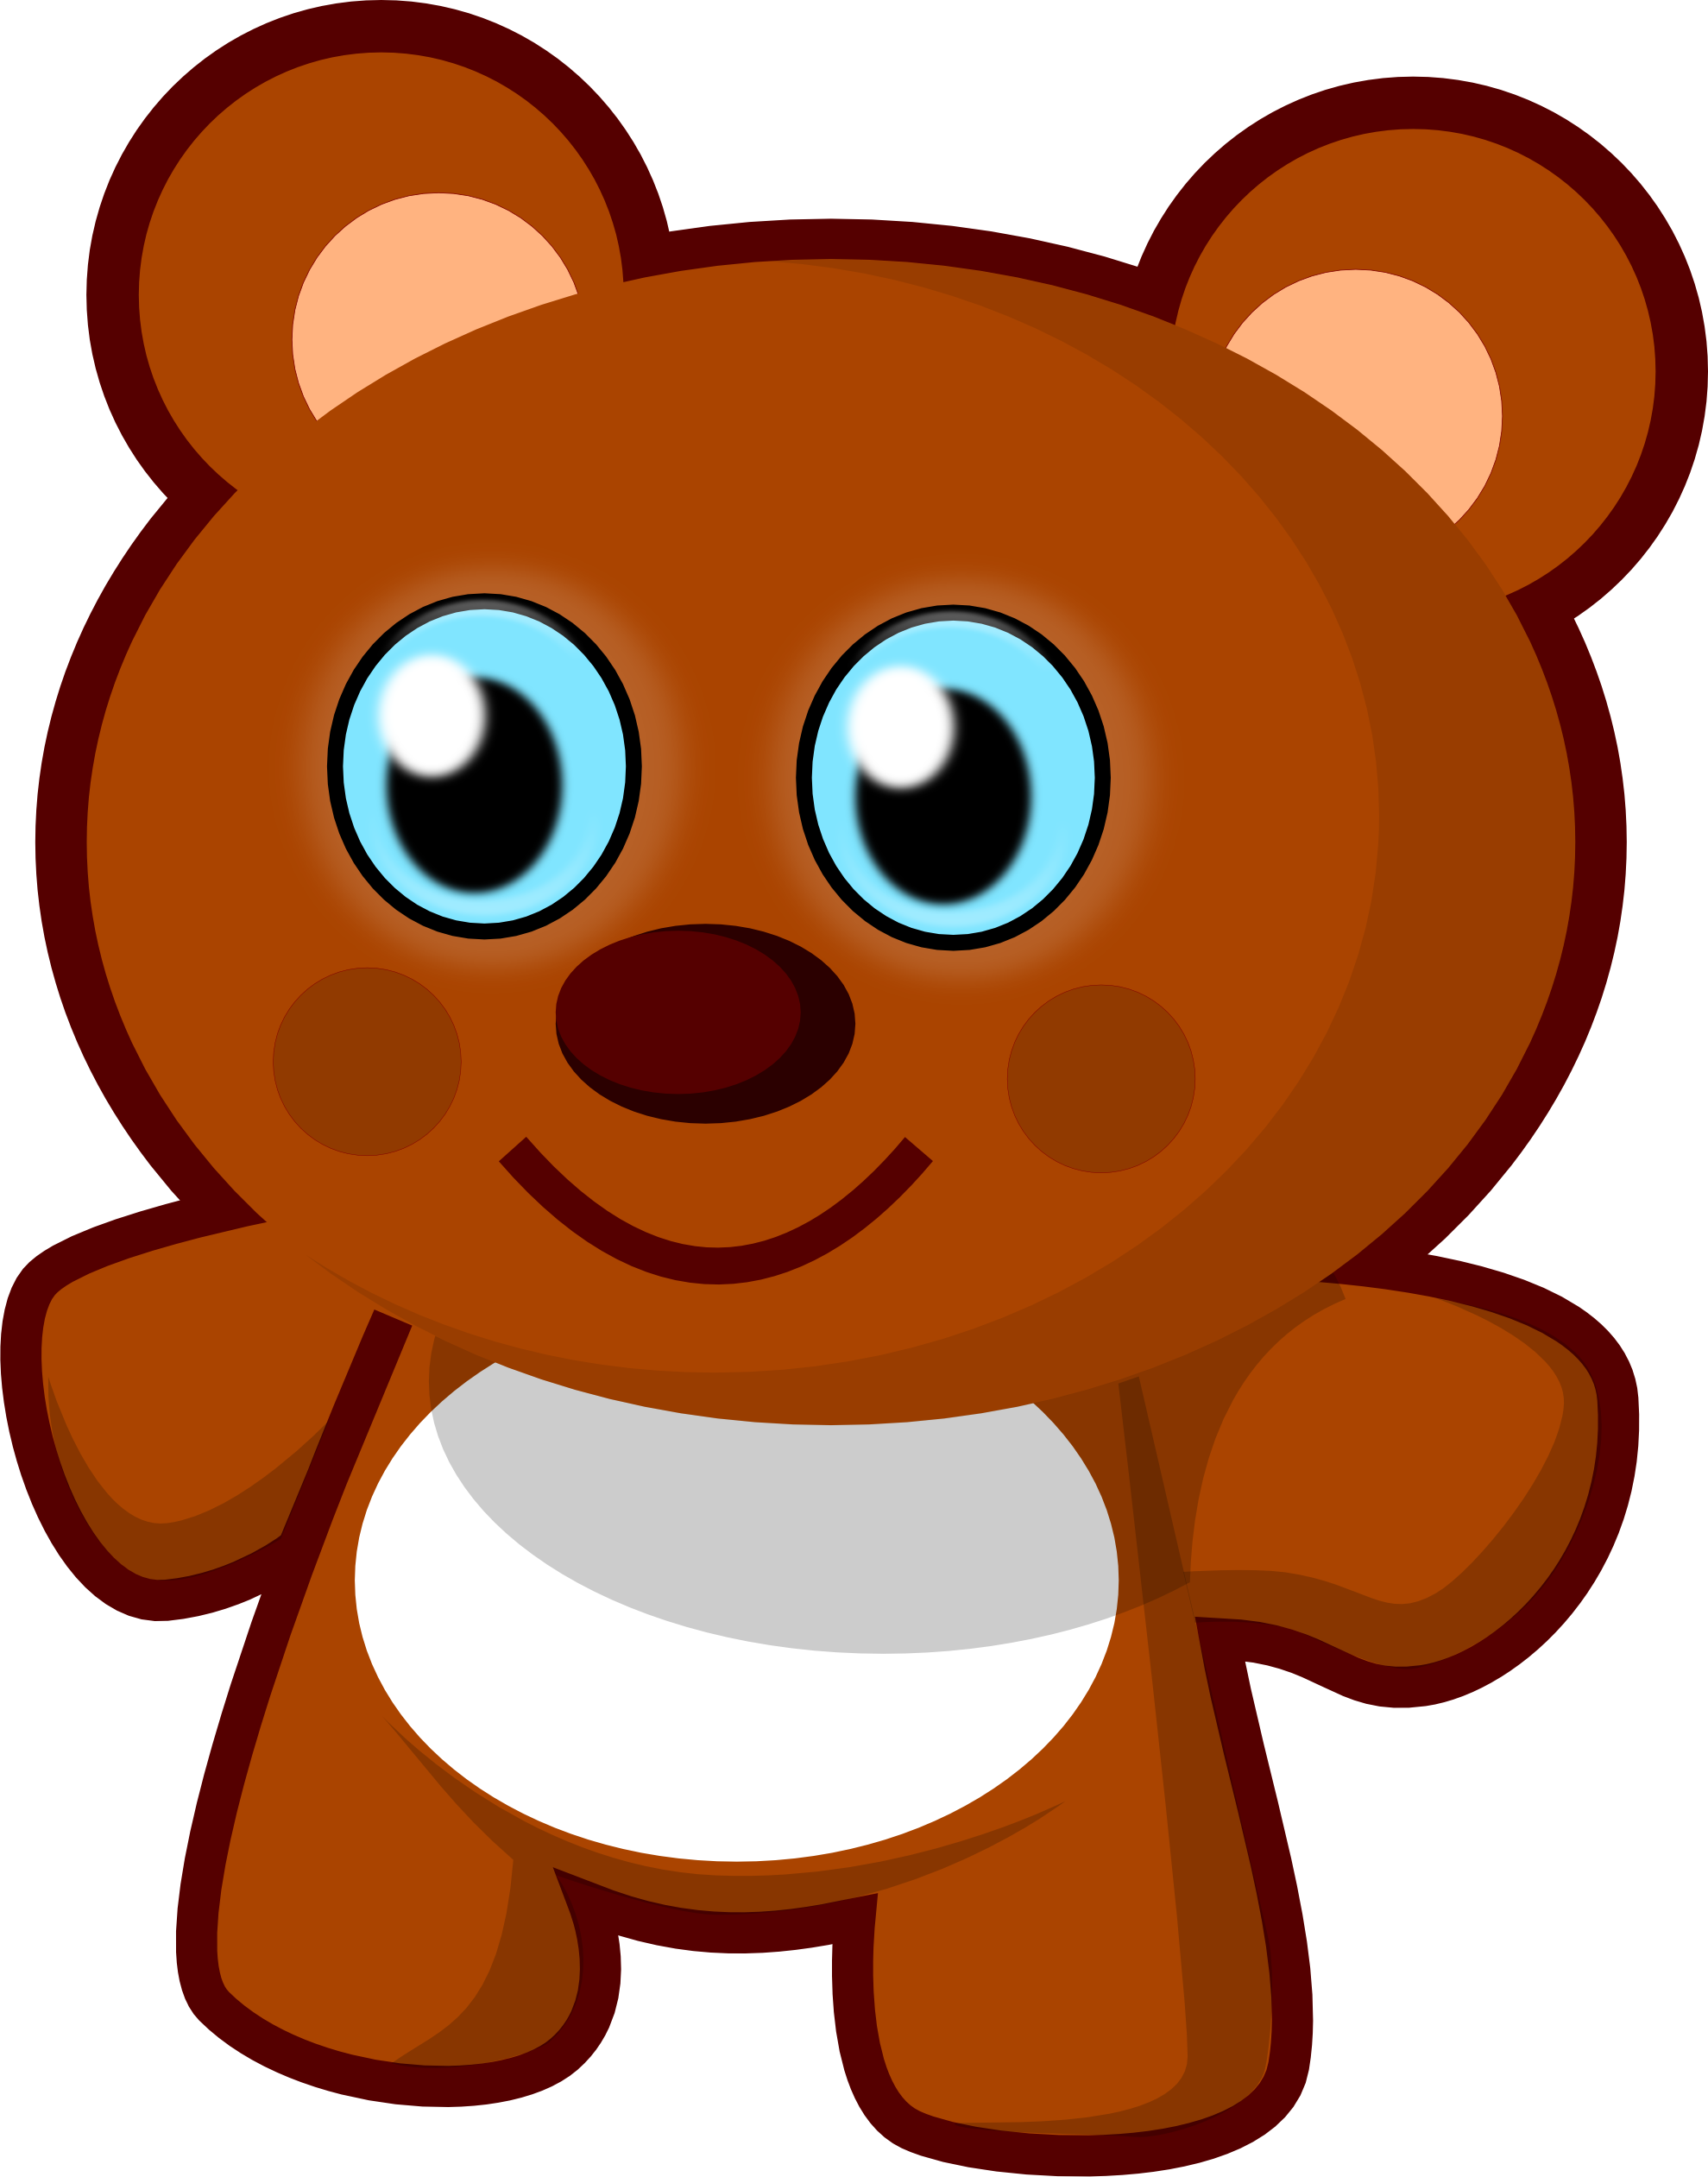 Free Bears Animal Cliparts, Download Free Clip Art, Free.